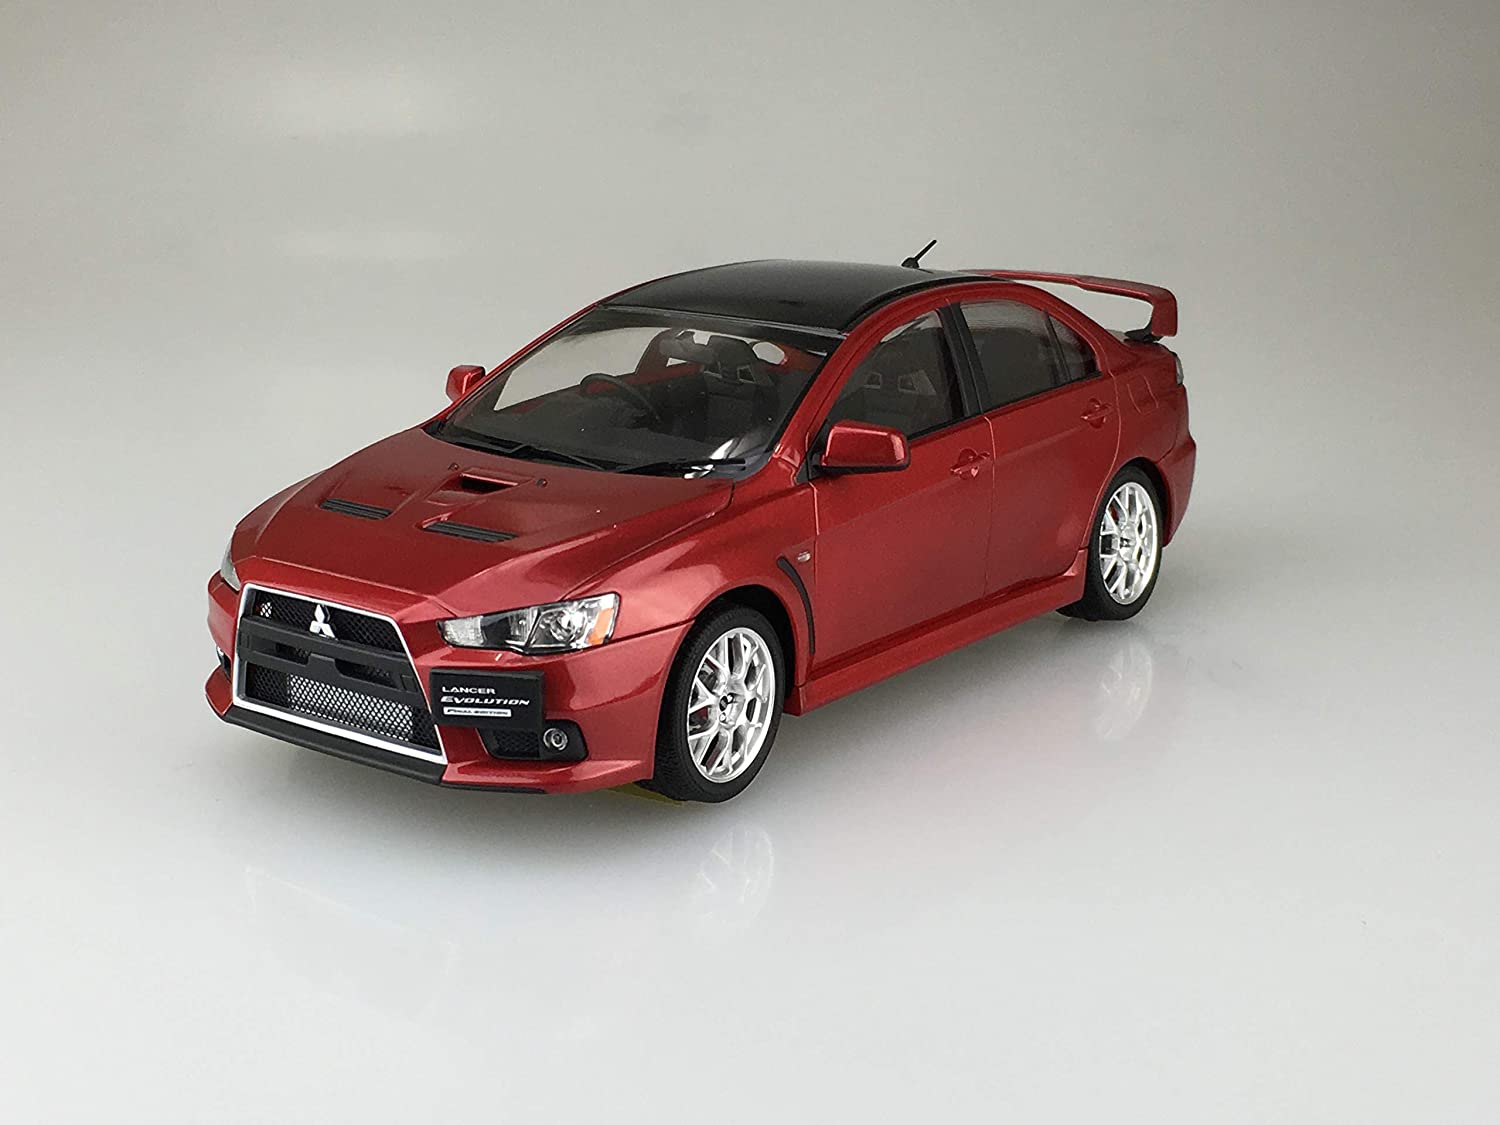 Aoshima No.SP Lancer Evolution Final Ed '15 Red Metallic Pre-painted 1/24 Scale 